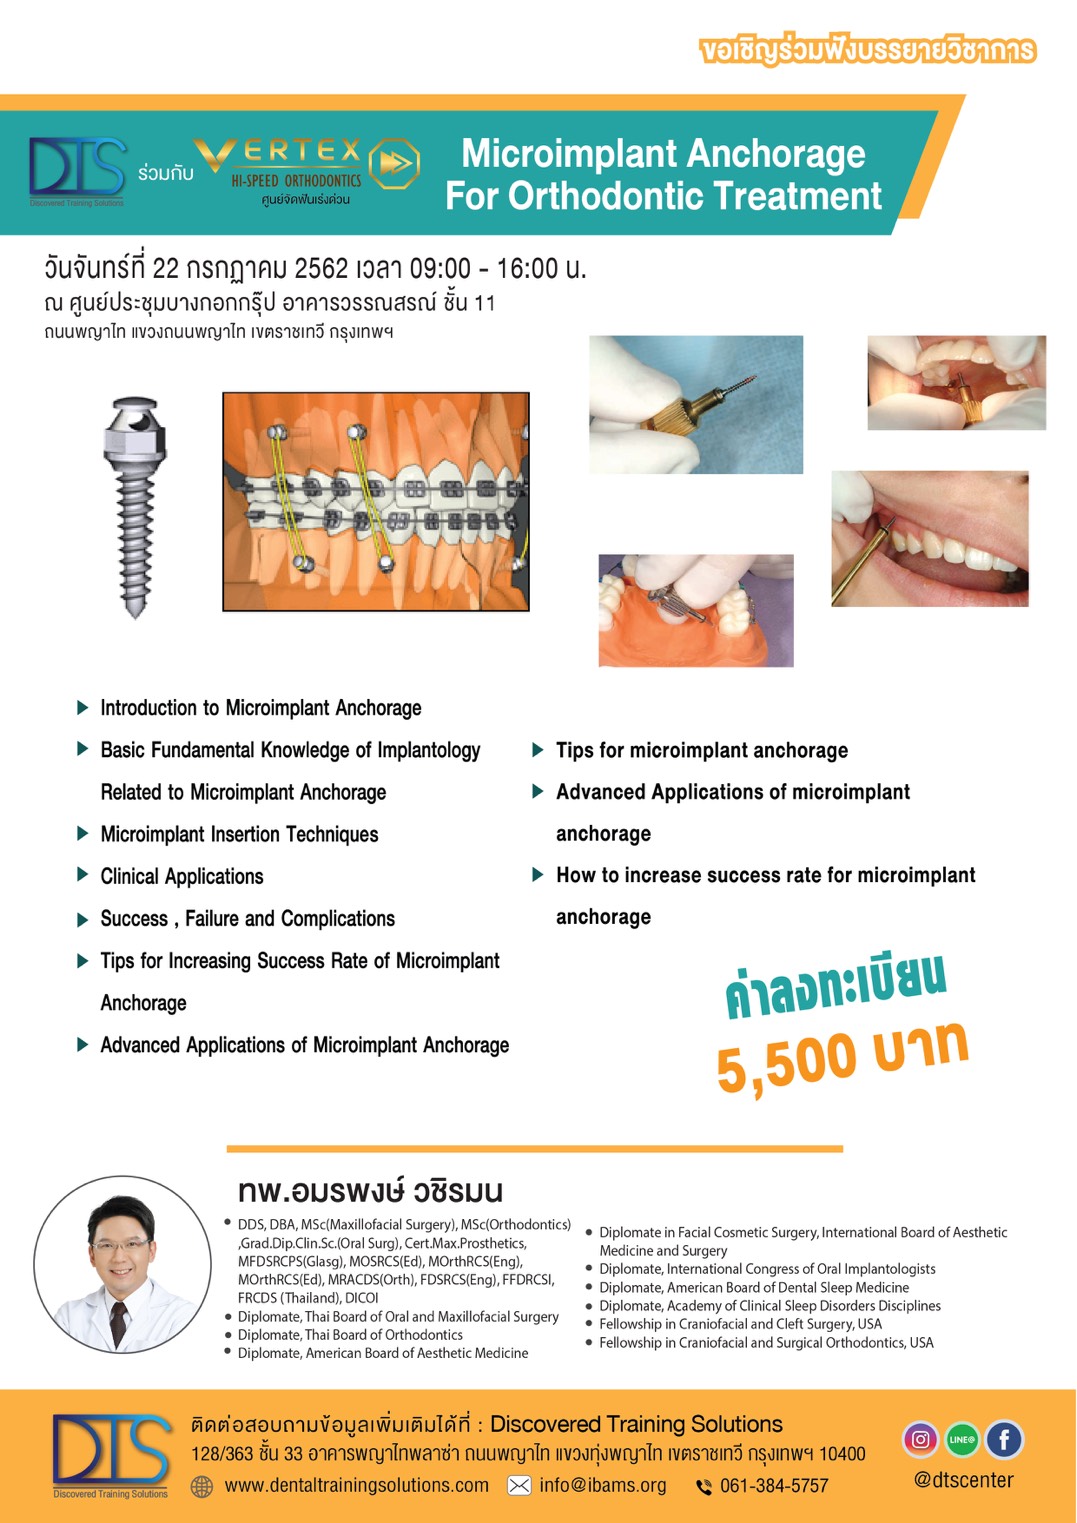 Microimplant Anchorage For Orthodontic Treatment